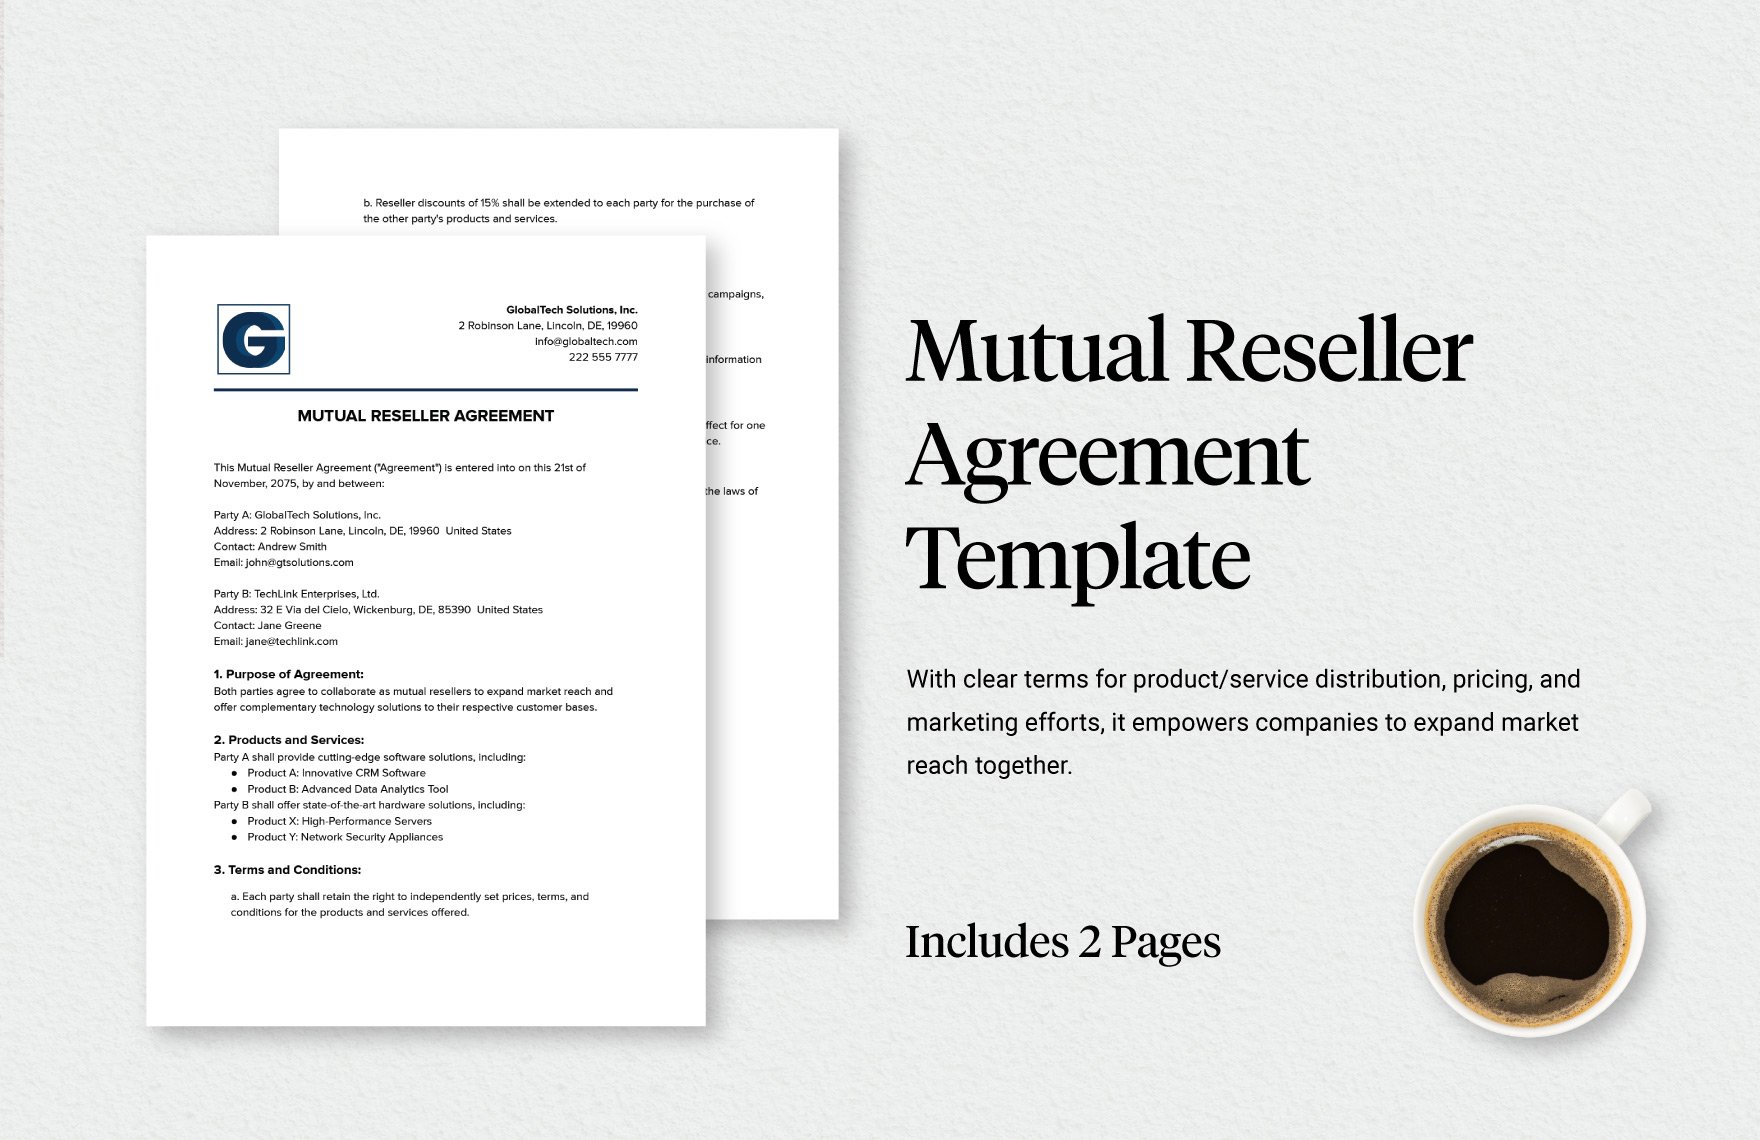 Mutual Reseller Agreement Template